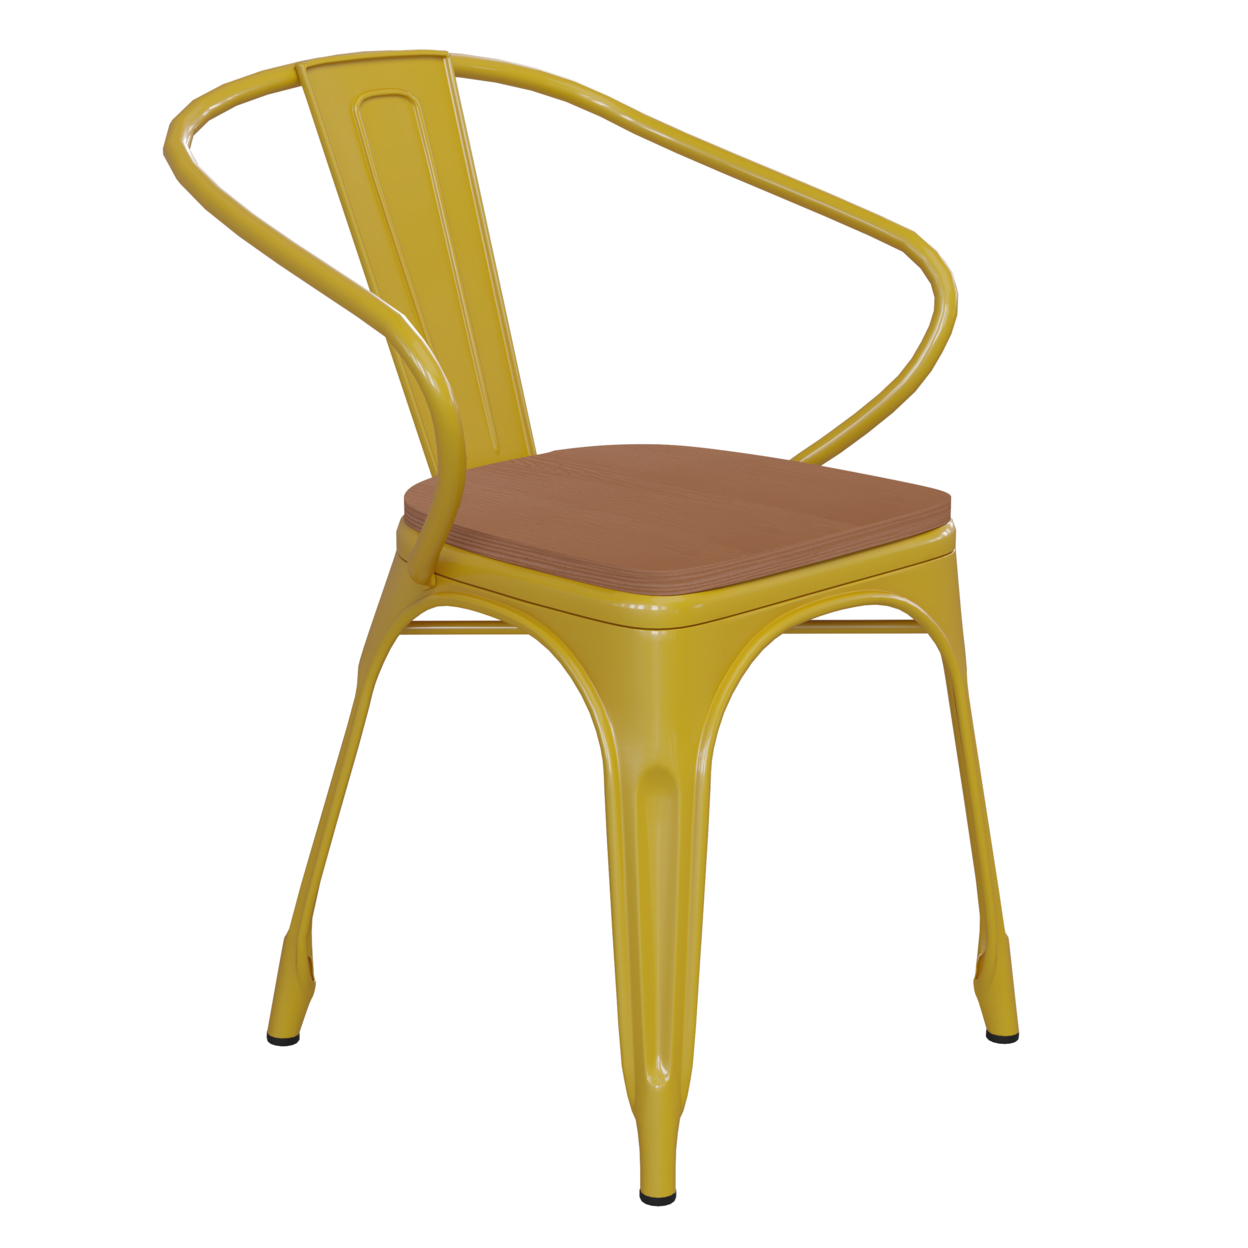 Metal Chair, Open Design Curved Arms, Polyresin Teal Blue Seat, Yellow